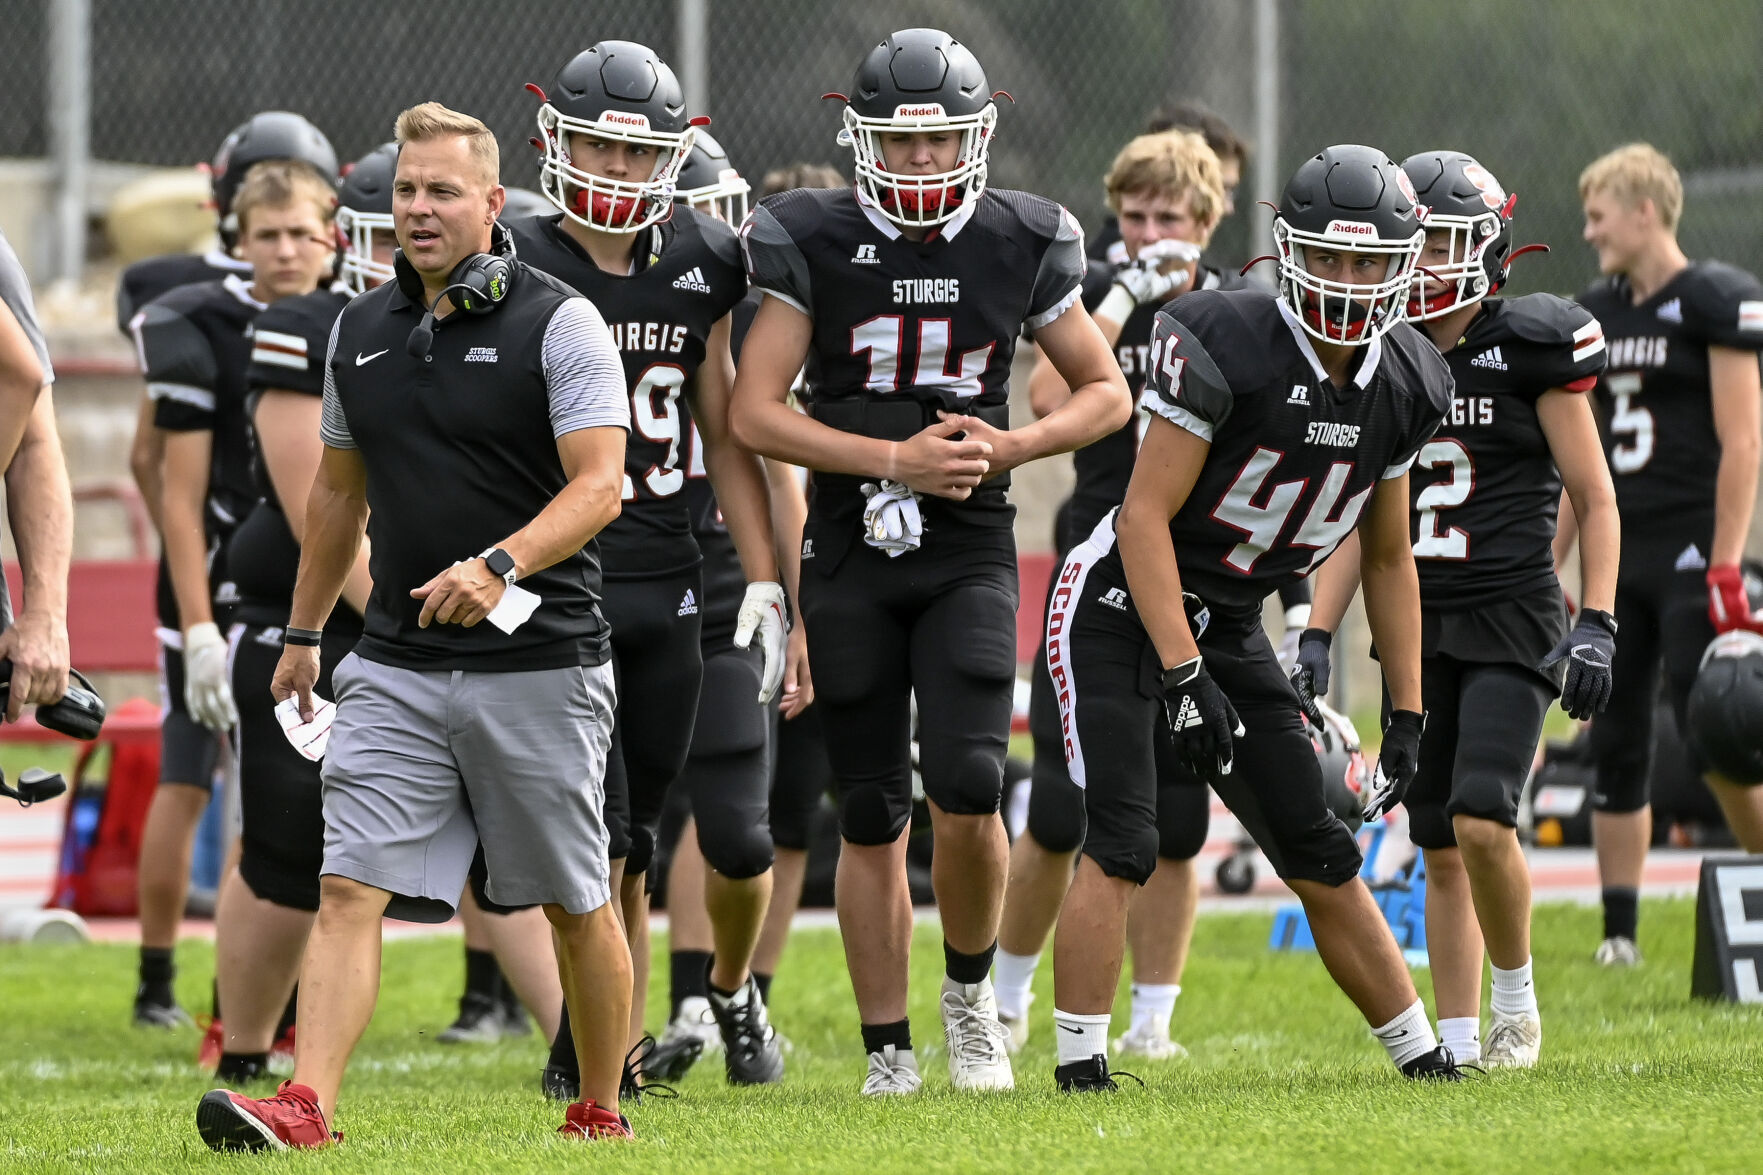 Sturgis Brown football team adjusts to changes in roster for the upcoming season